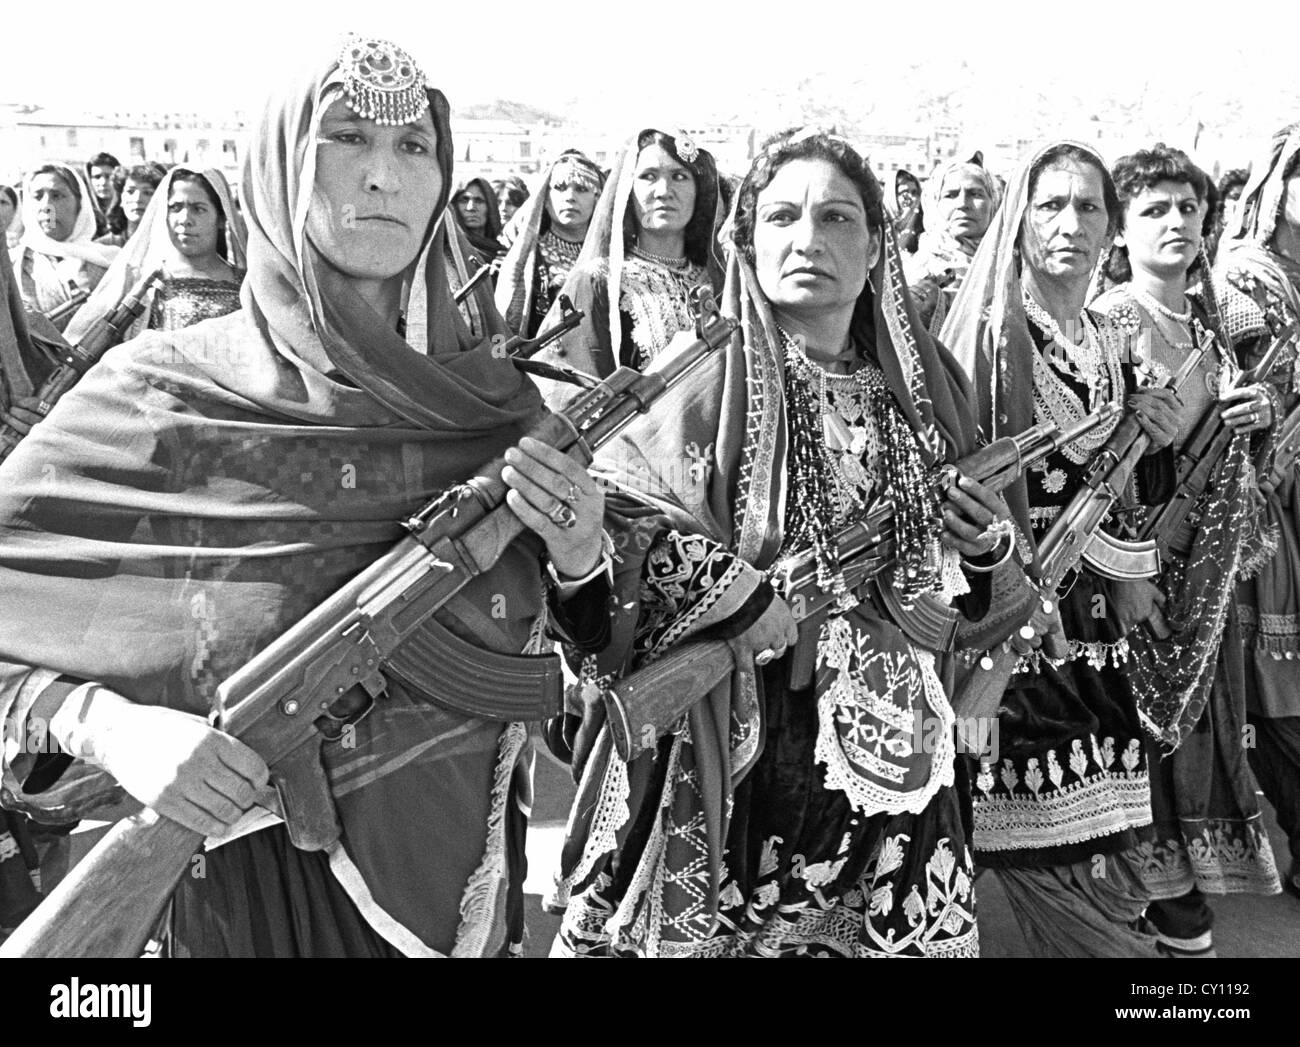 Afghan women village defense forces in traditional tribal costume carry Soviet AK-47's during a parade to mark the 10th anniversary of the communist revolution April 26, 1988 in Kabul, Afghanistan. Stock Photo